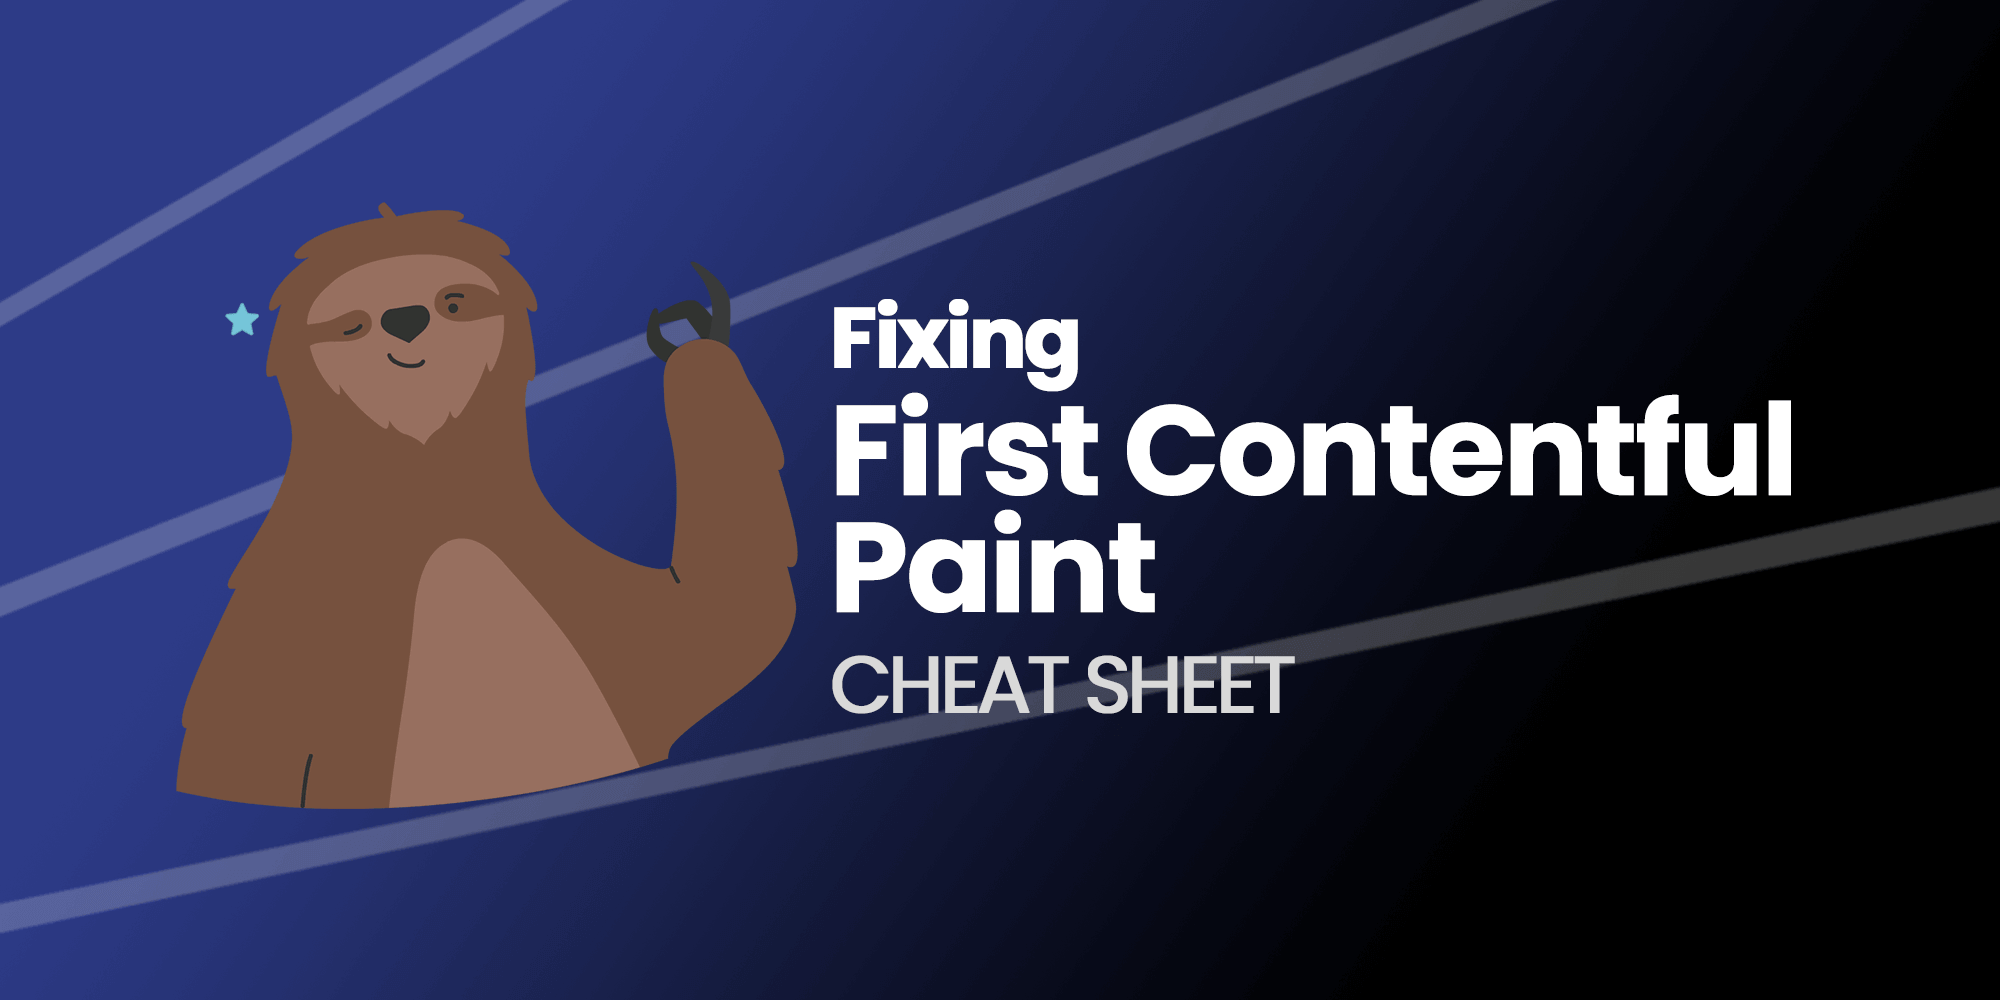 Fix Your First Contentful Paint (FCP): Cheat Sheet